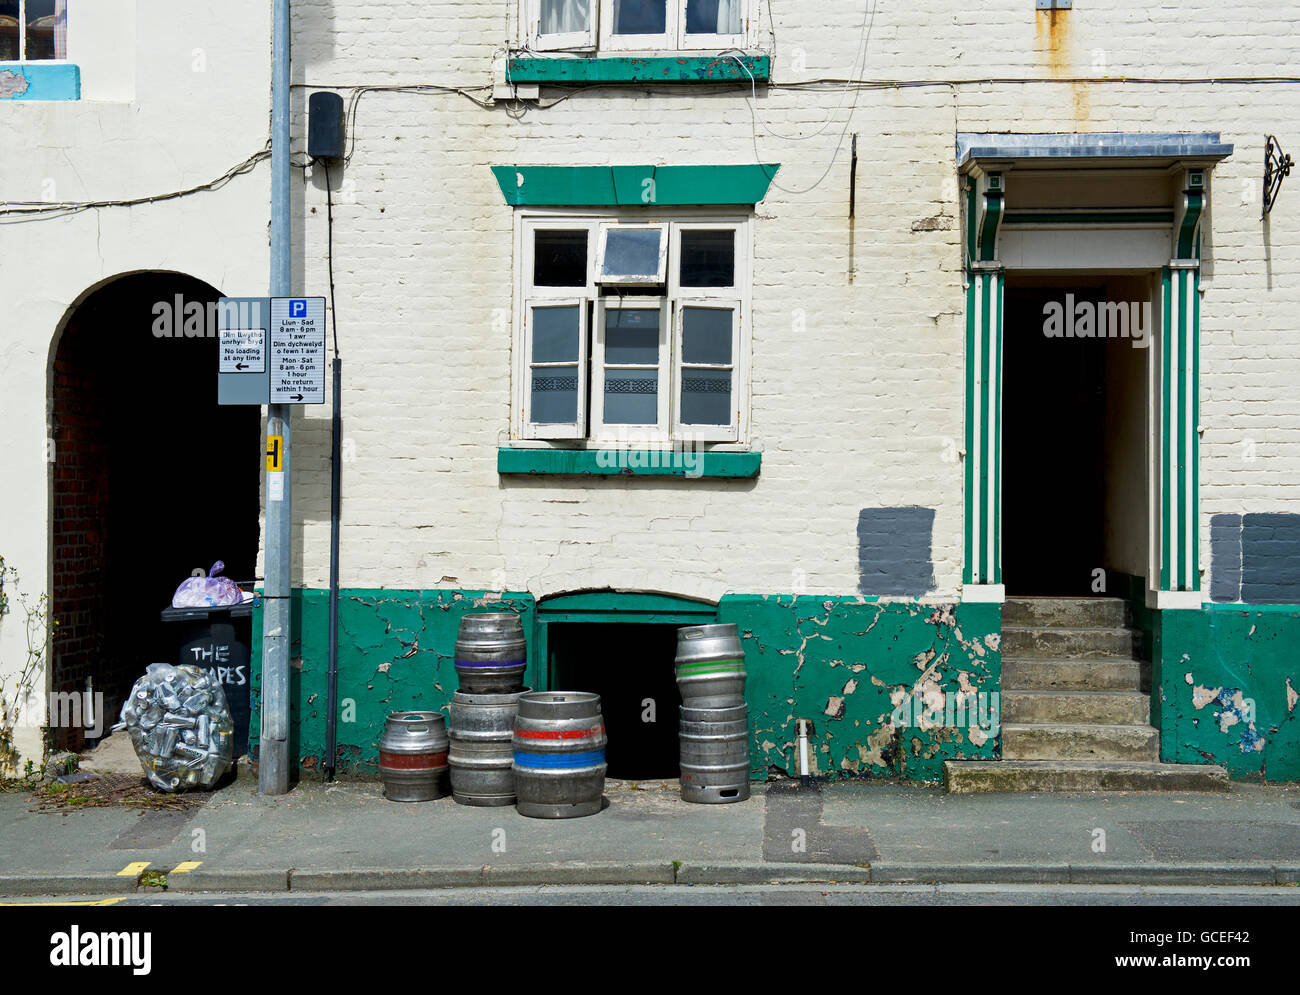 Pub door with beer barrel piled up outside, Newtown, Powys, Wales UK Stock Photo